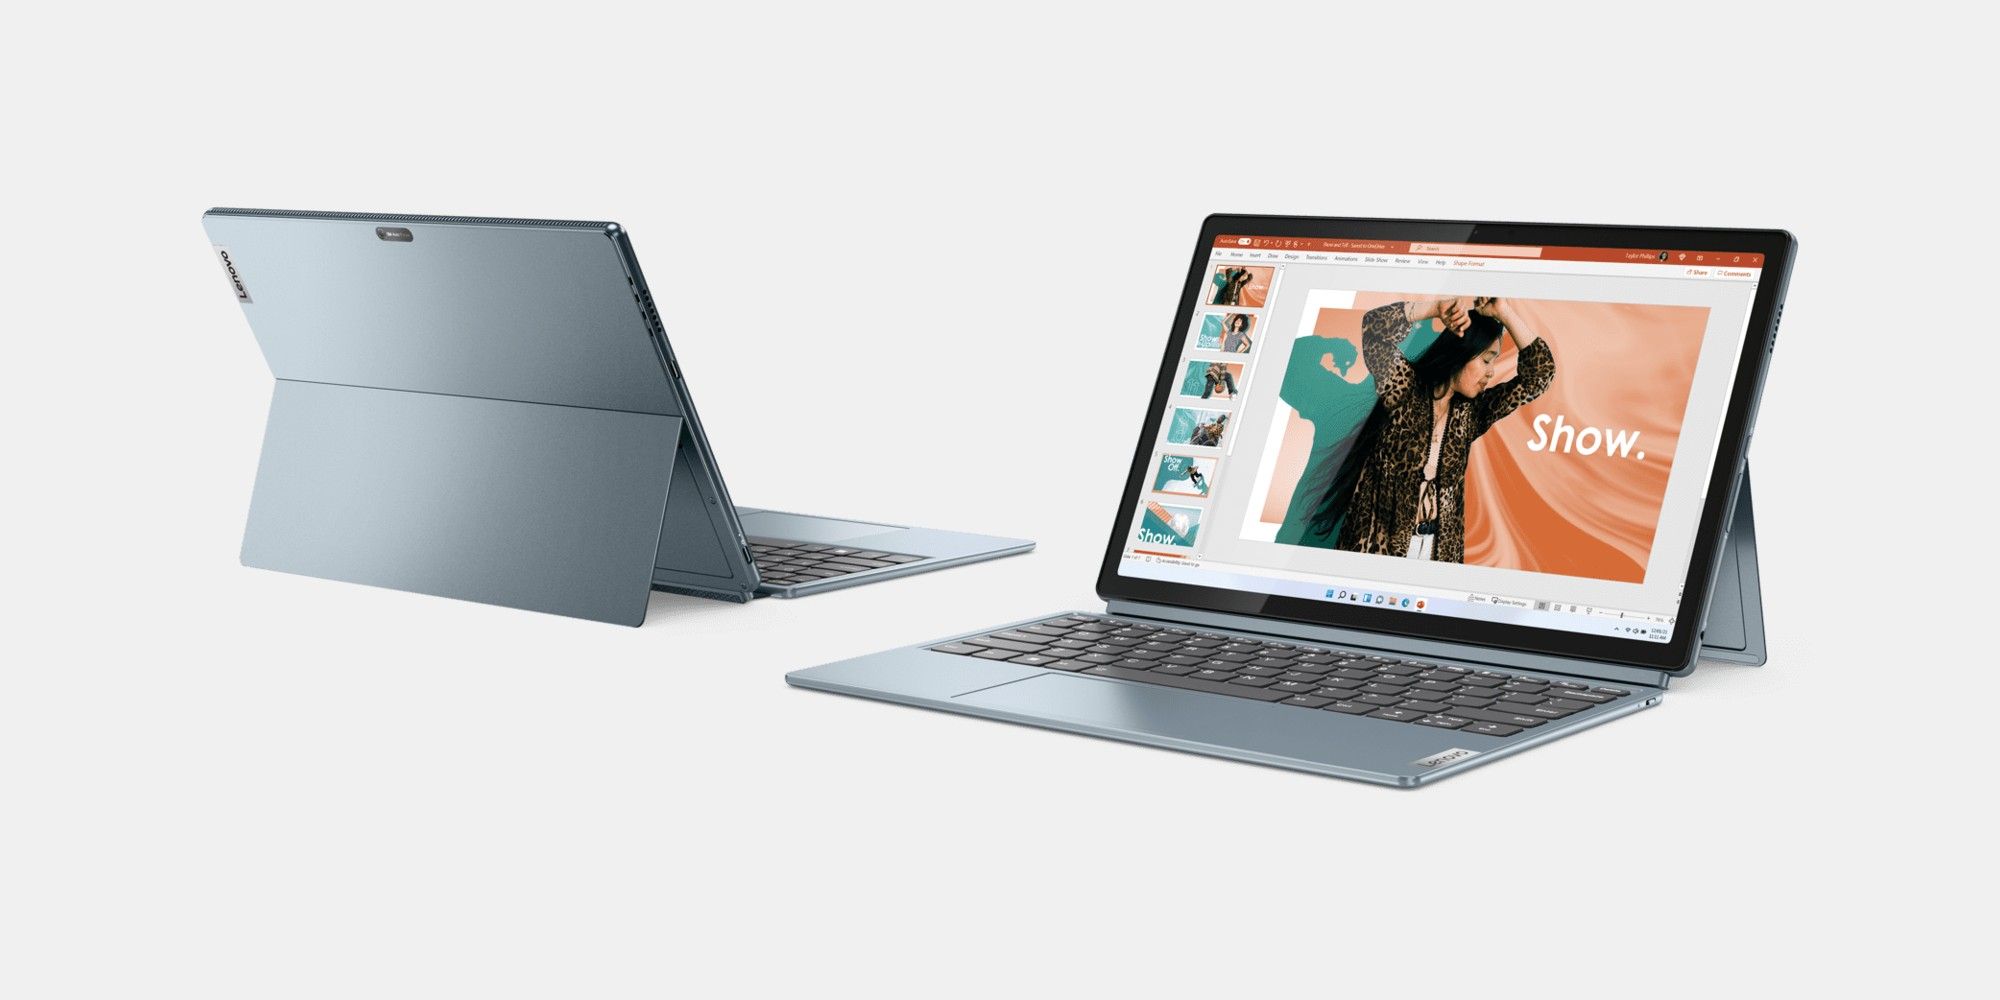 The Lenovo IdeaPad Duet 5i comes with a detachable keyboard